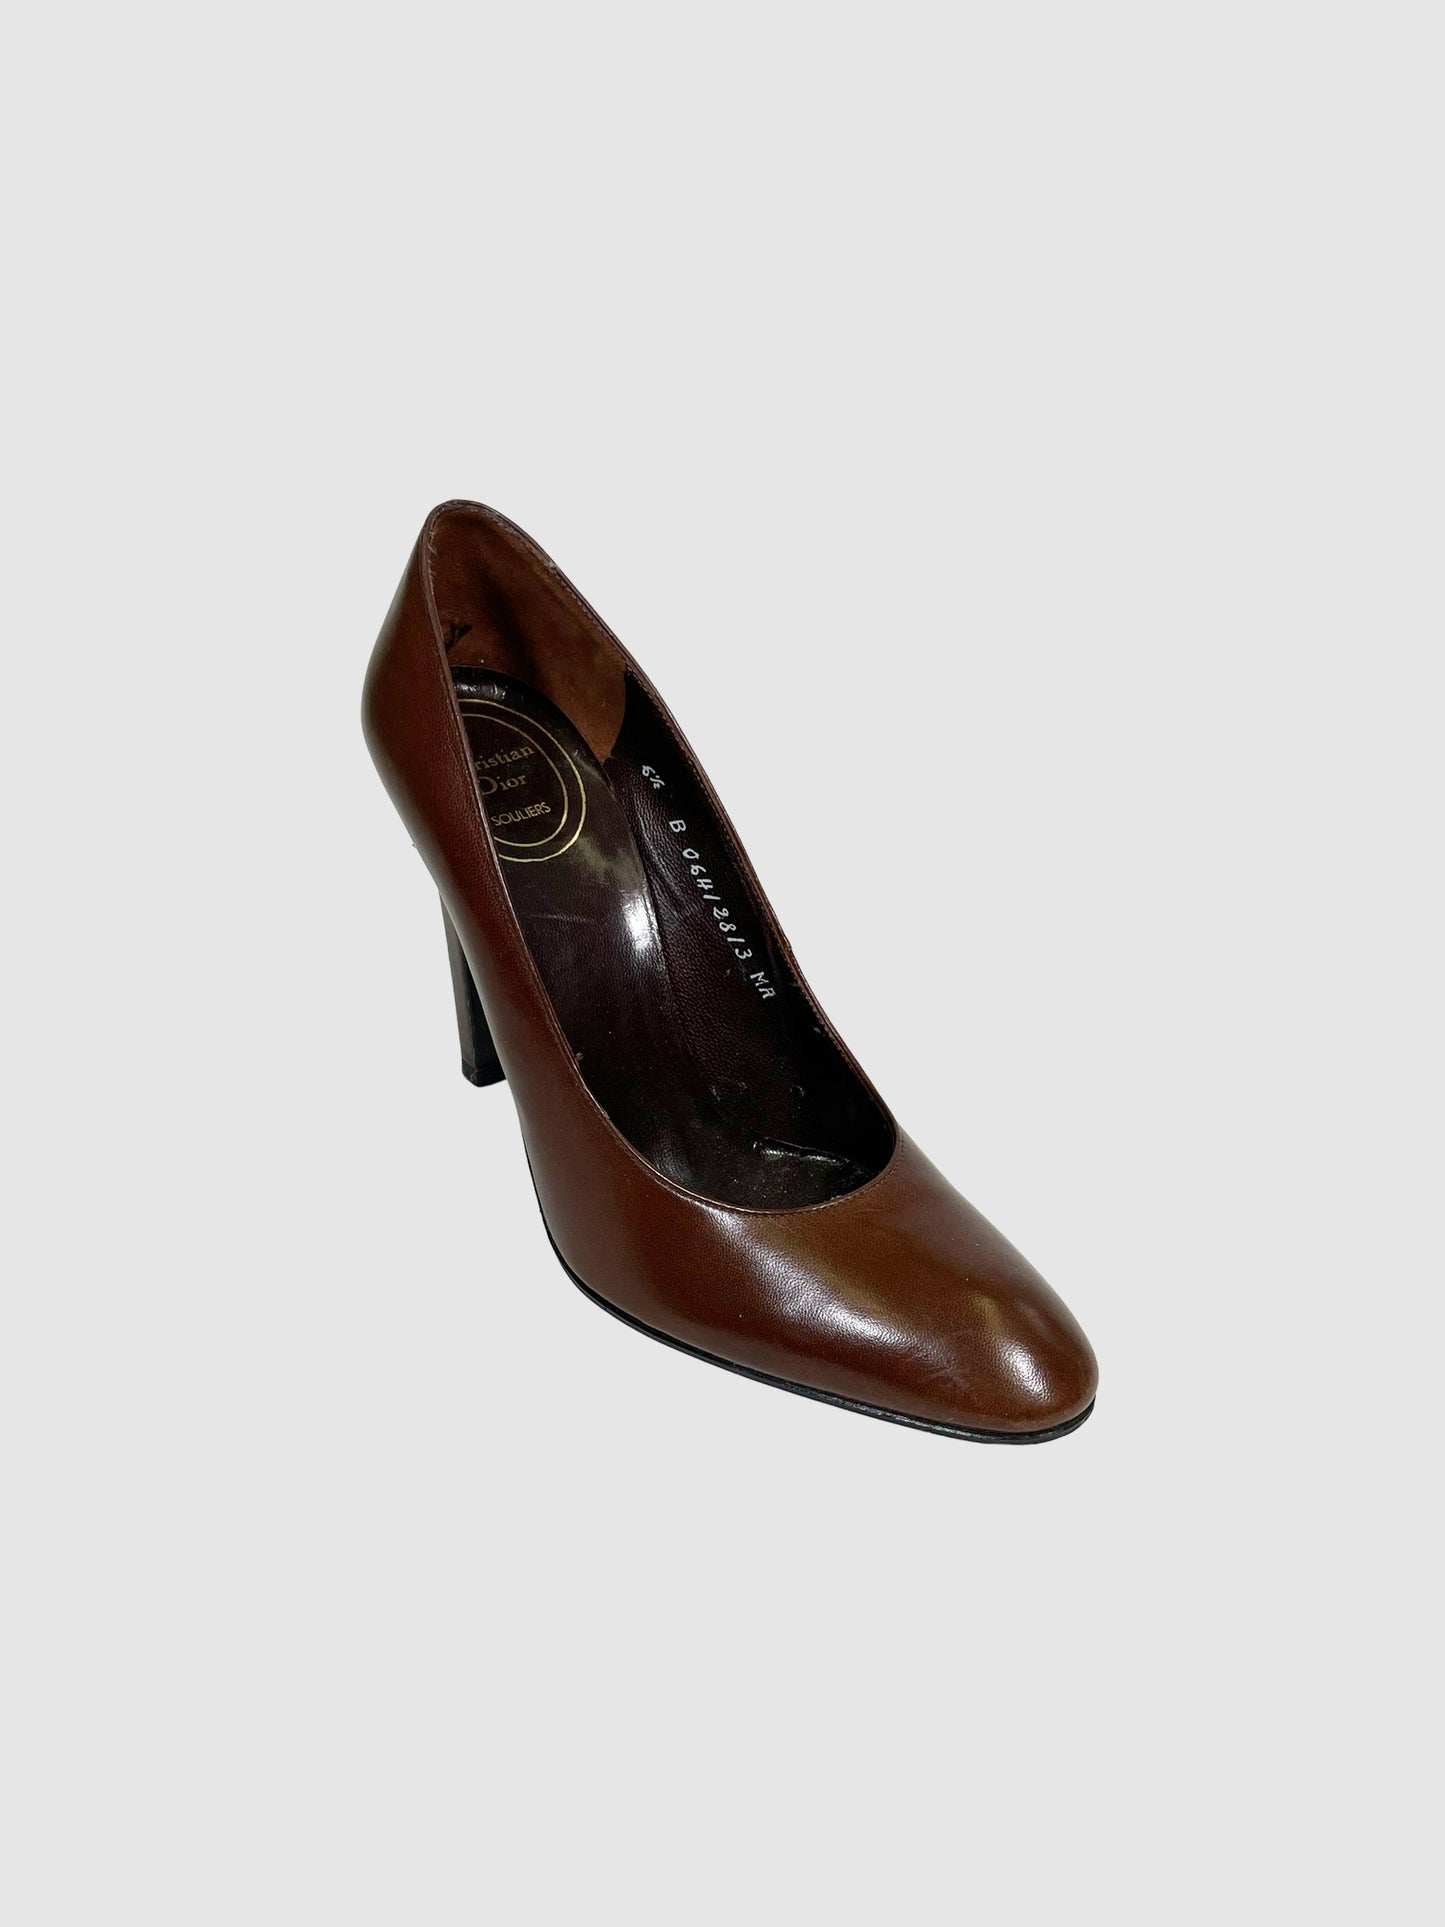 Christian Dior Leather Pumps - Size 6.5